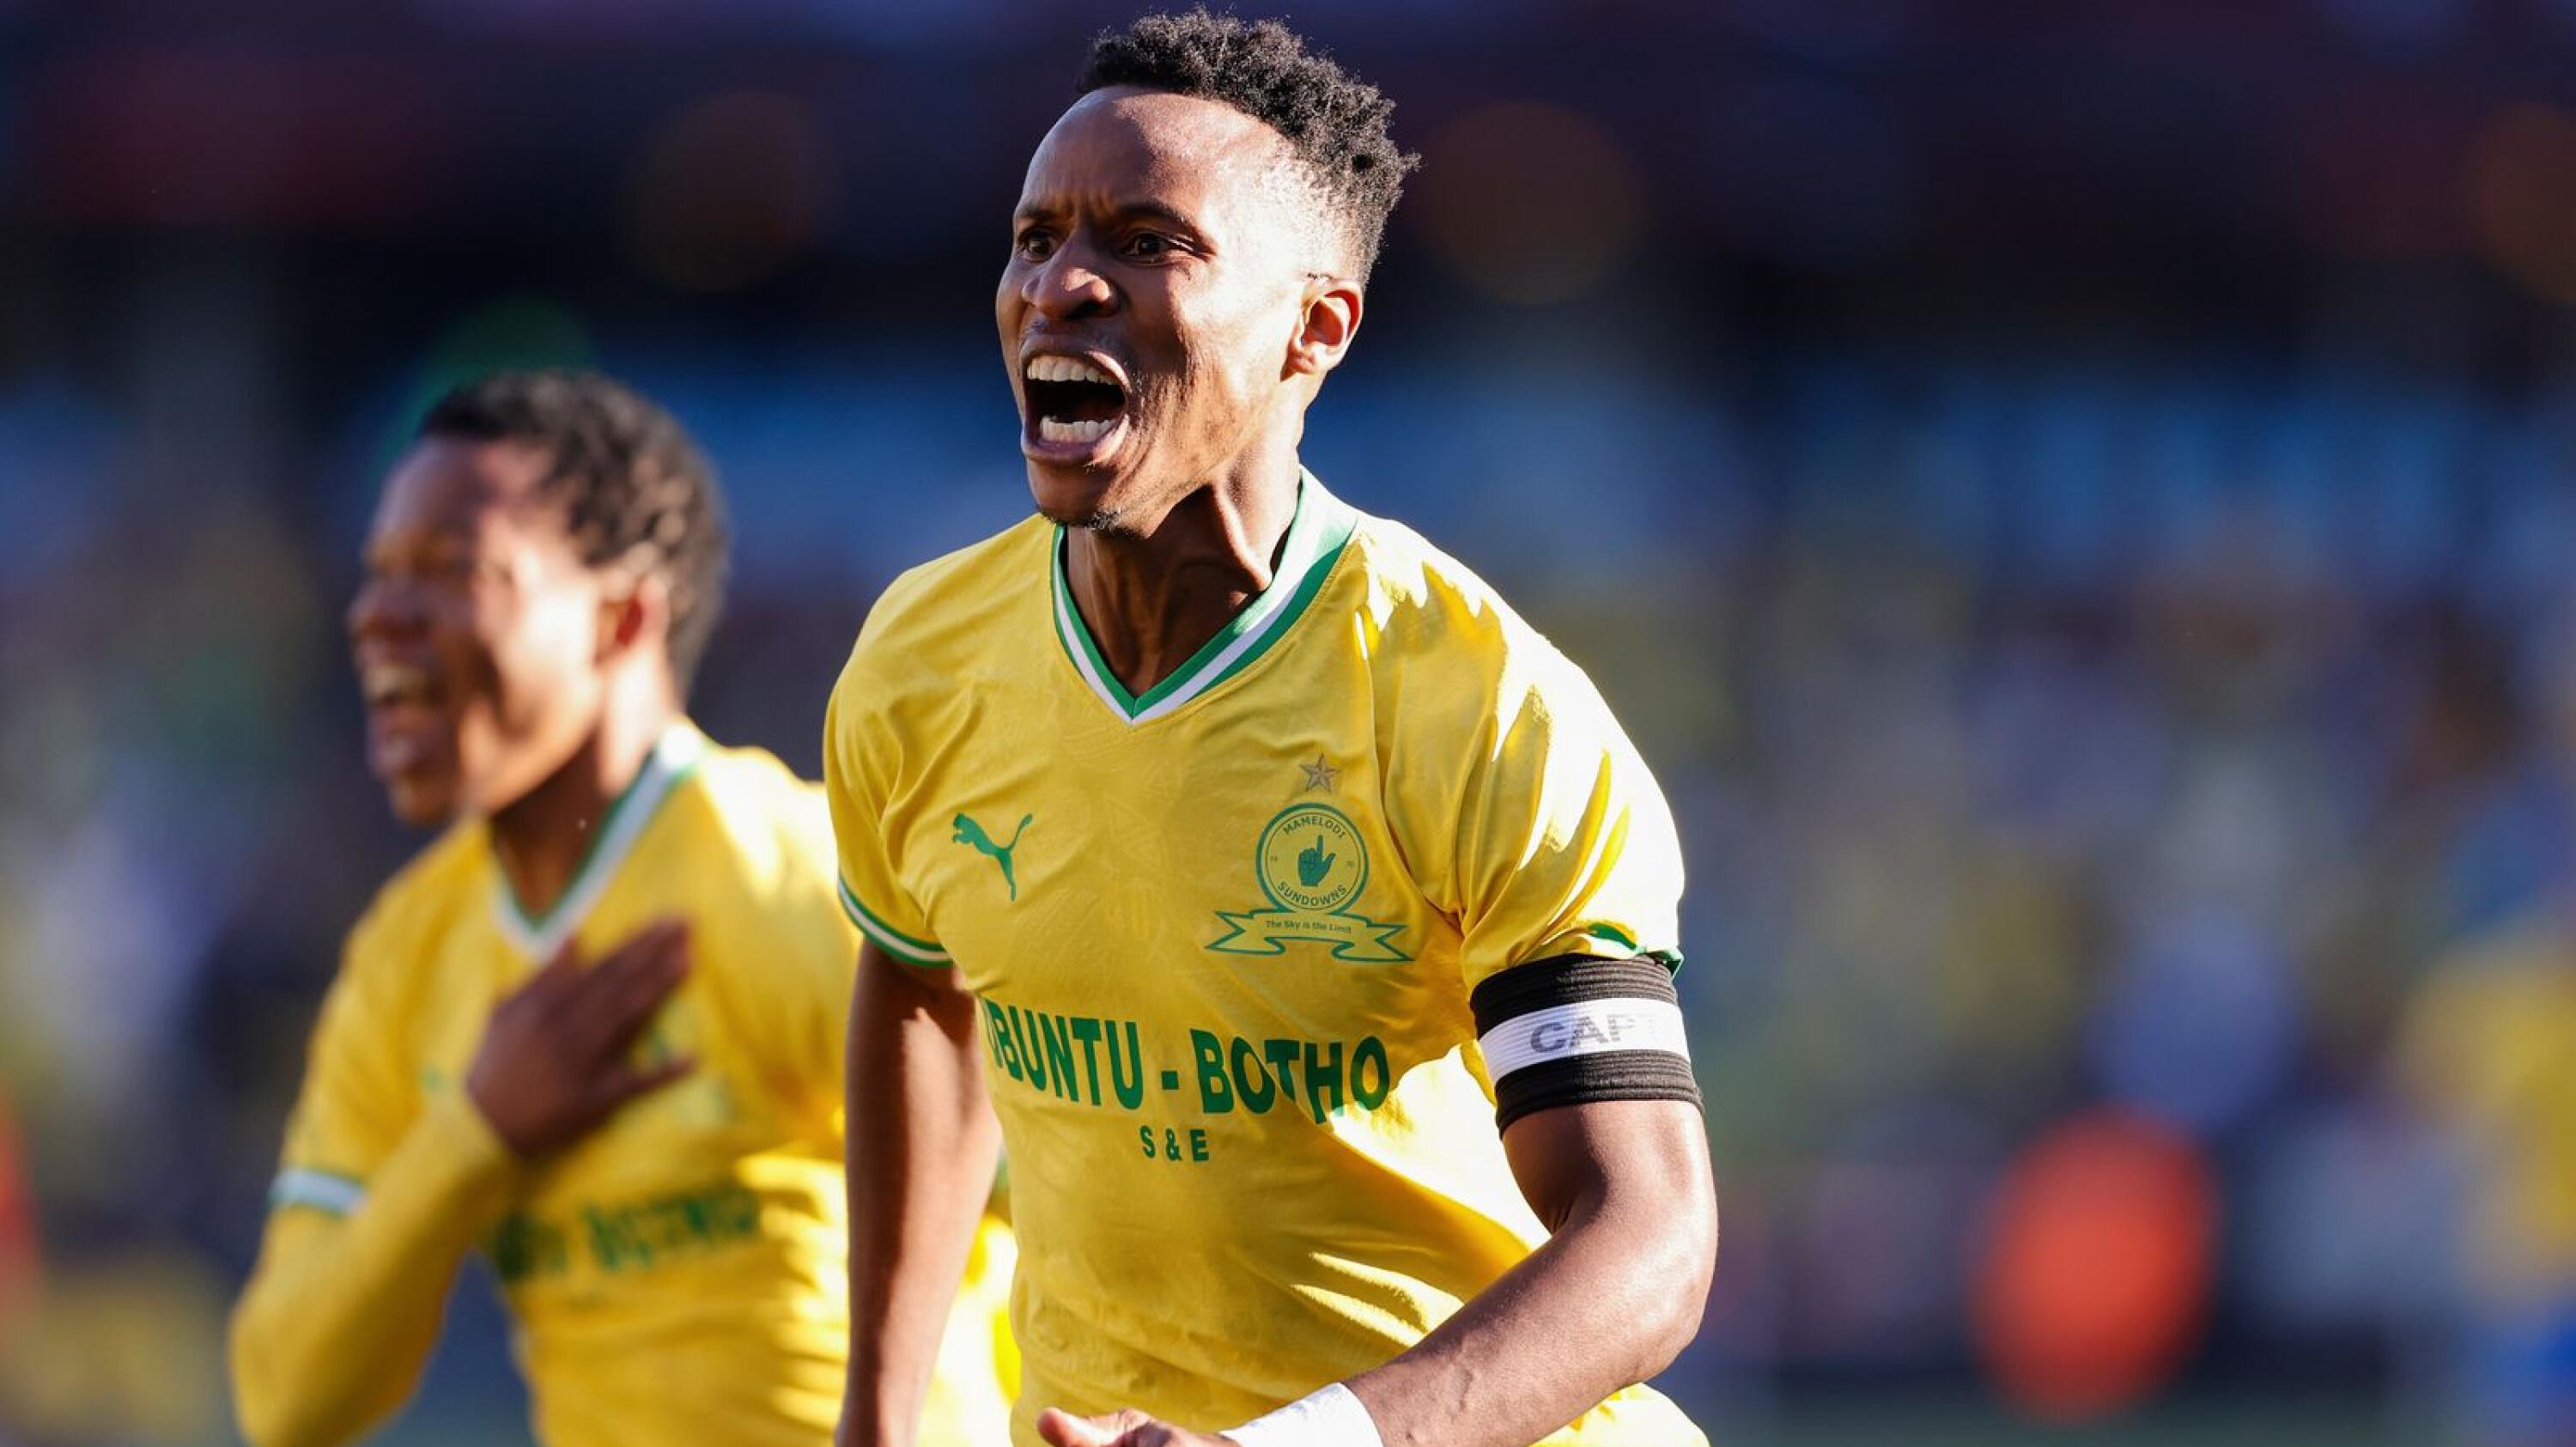 Themba Zwane scored the only goal of the game as Mamelodi Sundowns kicked off their MTN8 campaign with a narrow win over Moroka Swallows